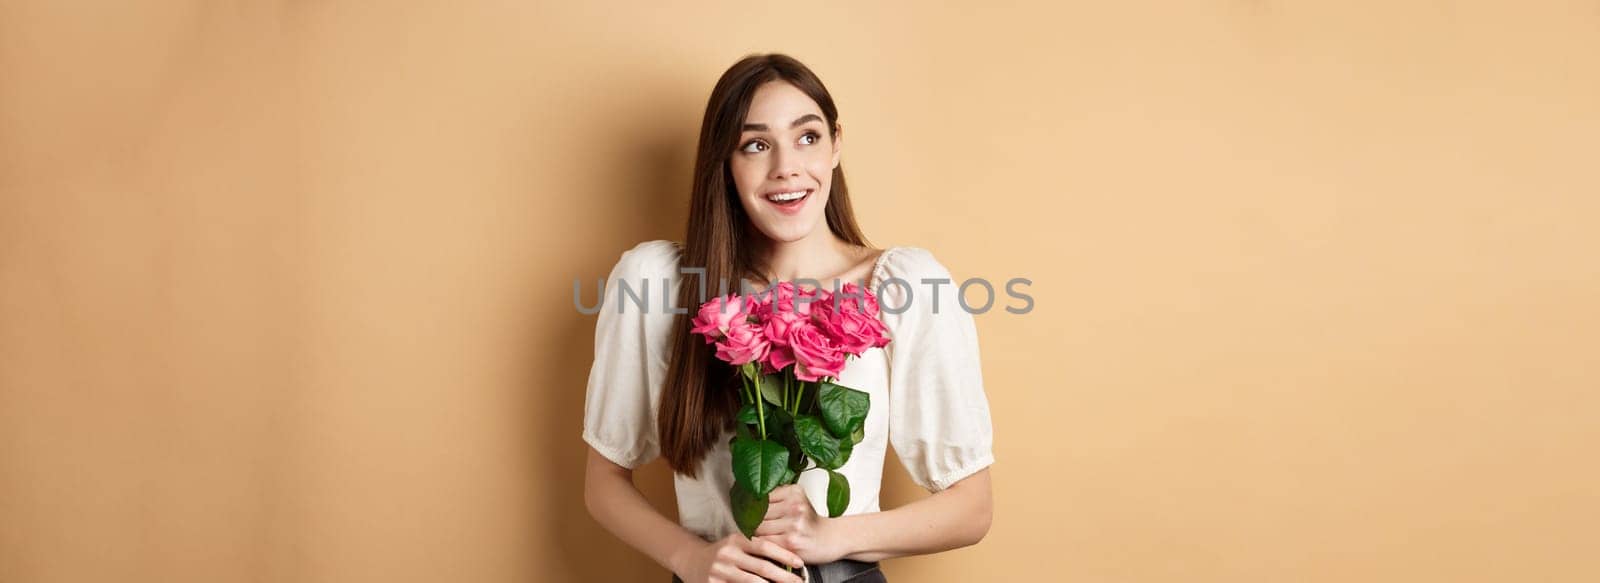 Happy valentines day. Dreamy smiling woman receive bouquet of pink roses and looking aside with love, standing on beige background.